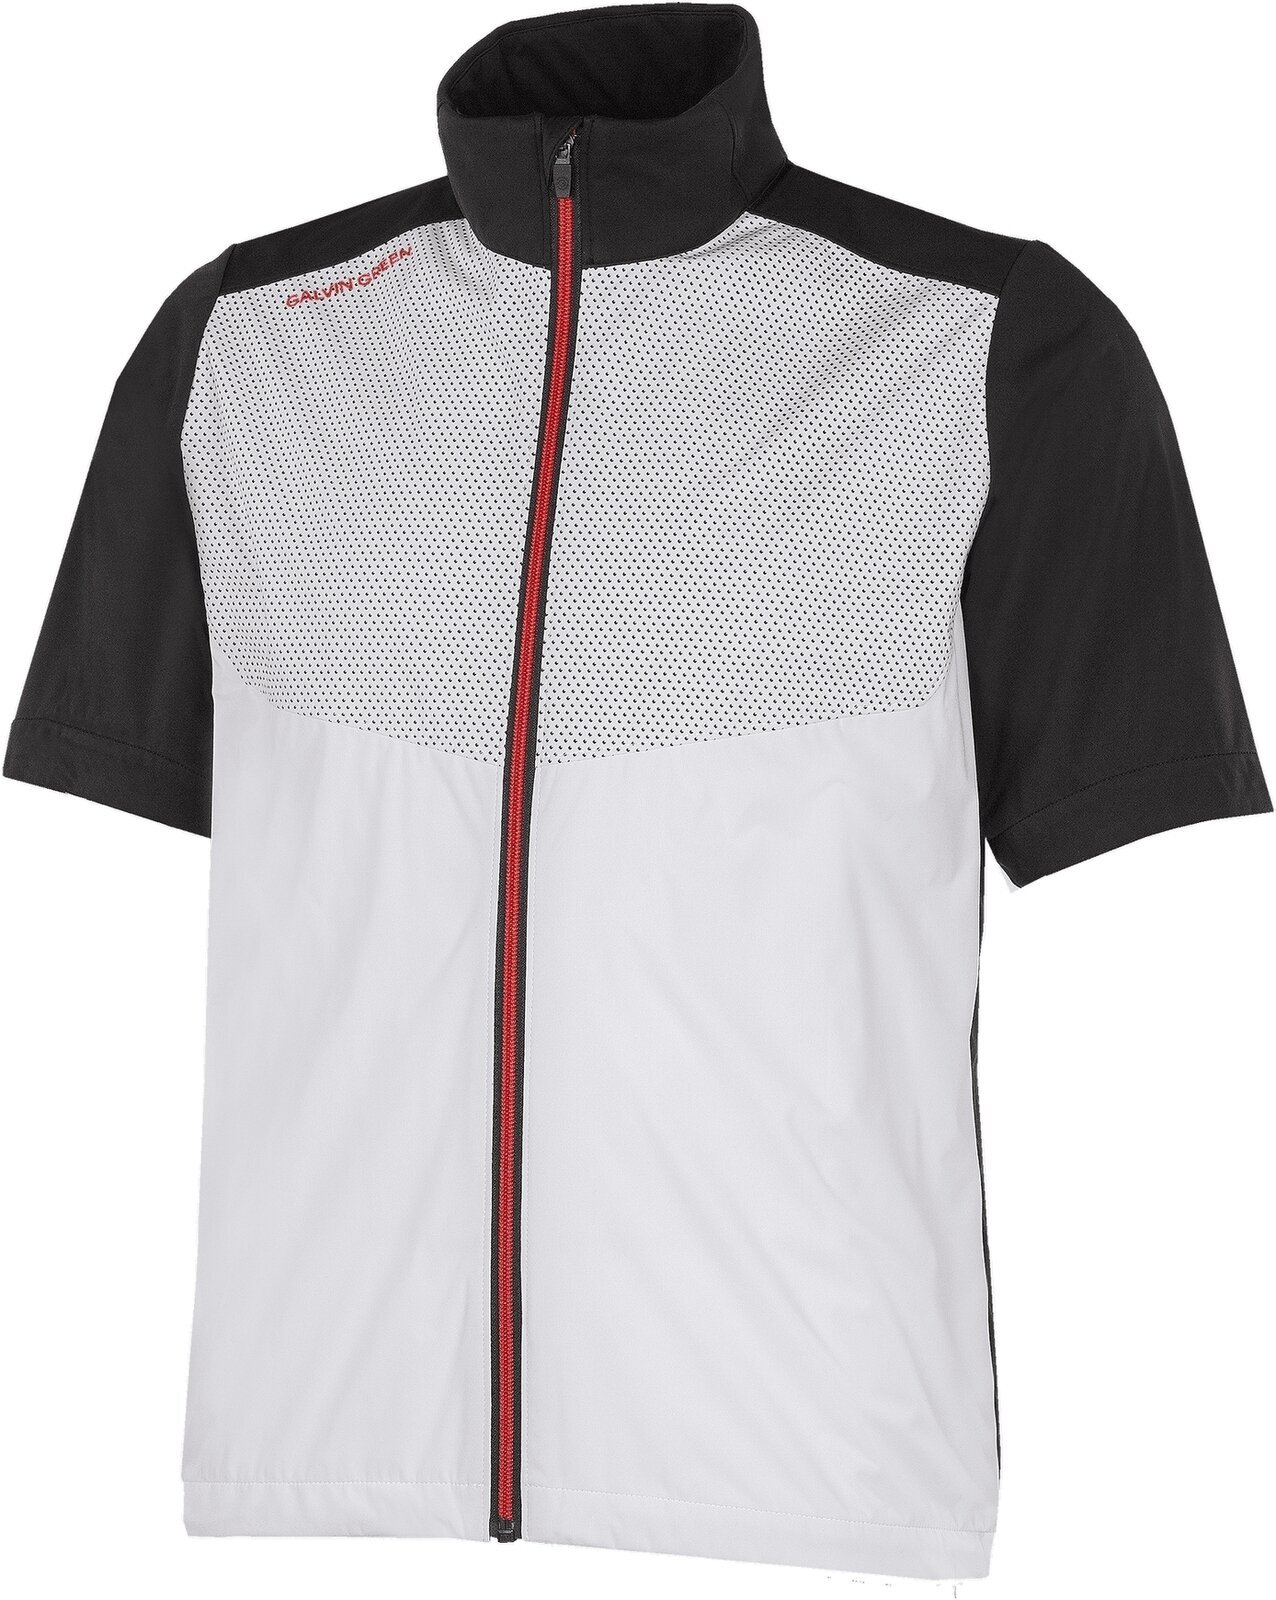 Veste Galvin Green Livingston Mens Windproof And Water Repellent Short Sleeve Jacket White/Black/Red 2XL